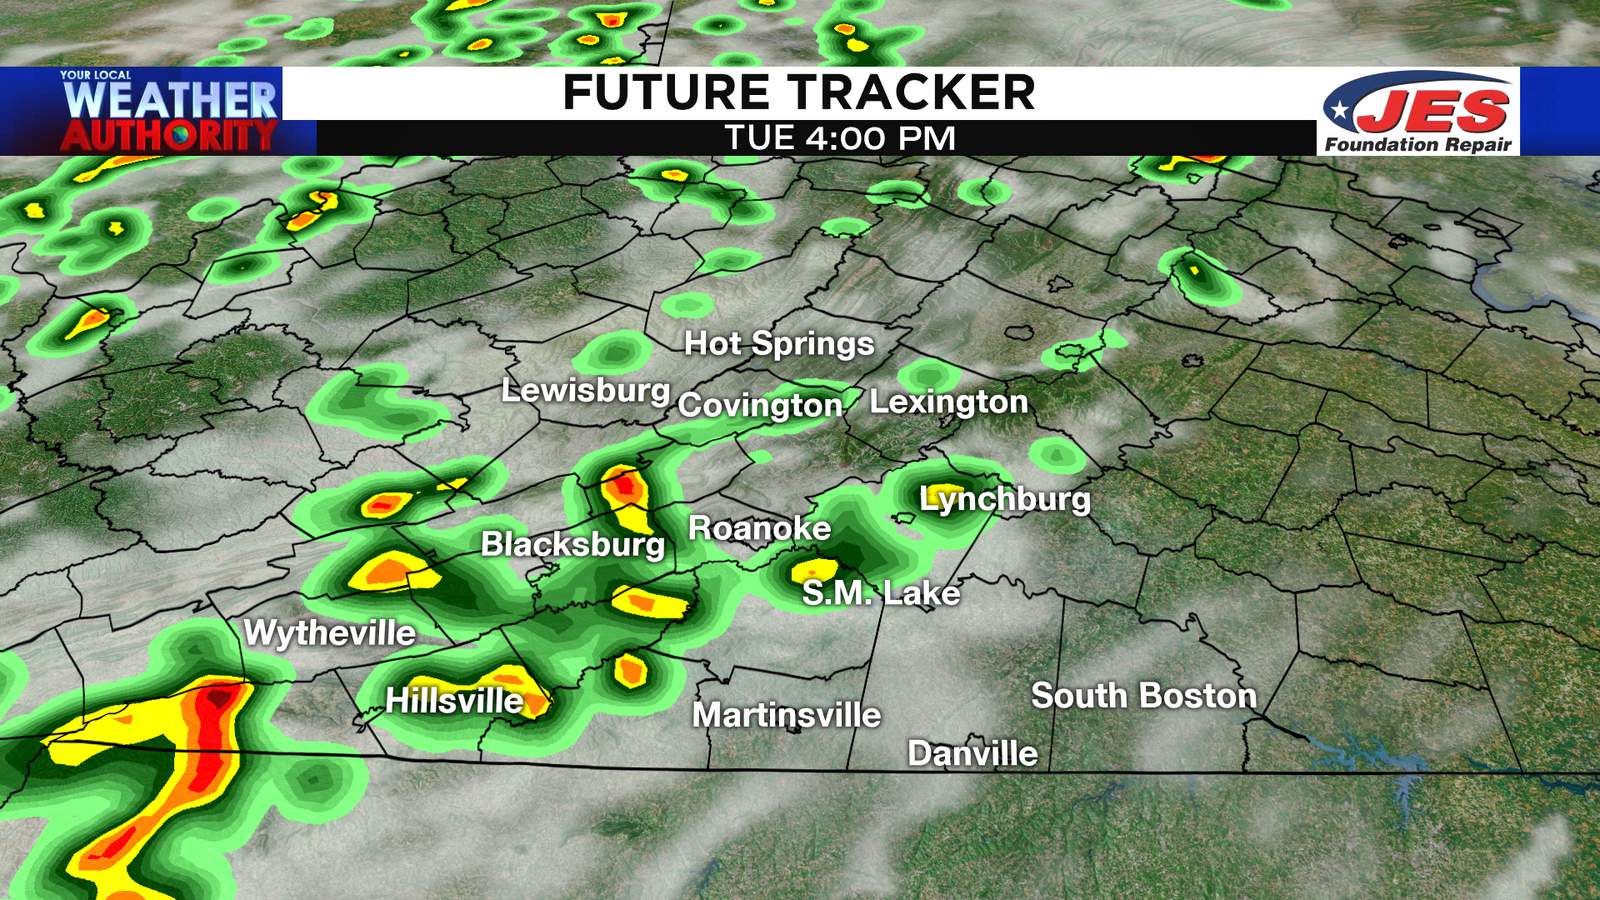 More storms fire up Tuesday before a subtle drop in humidity levels